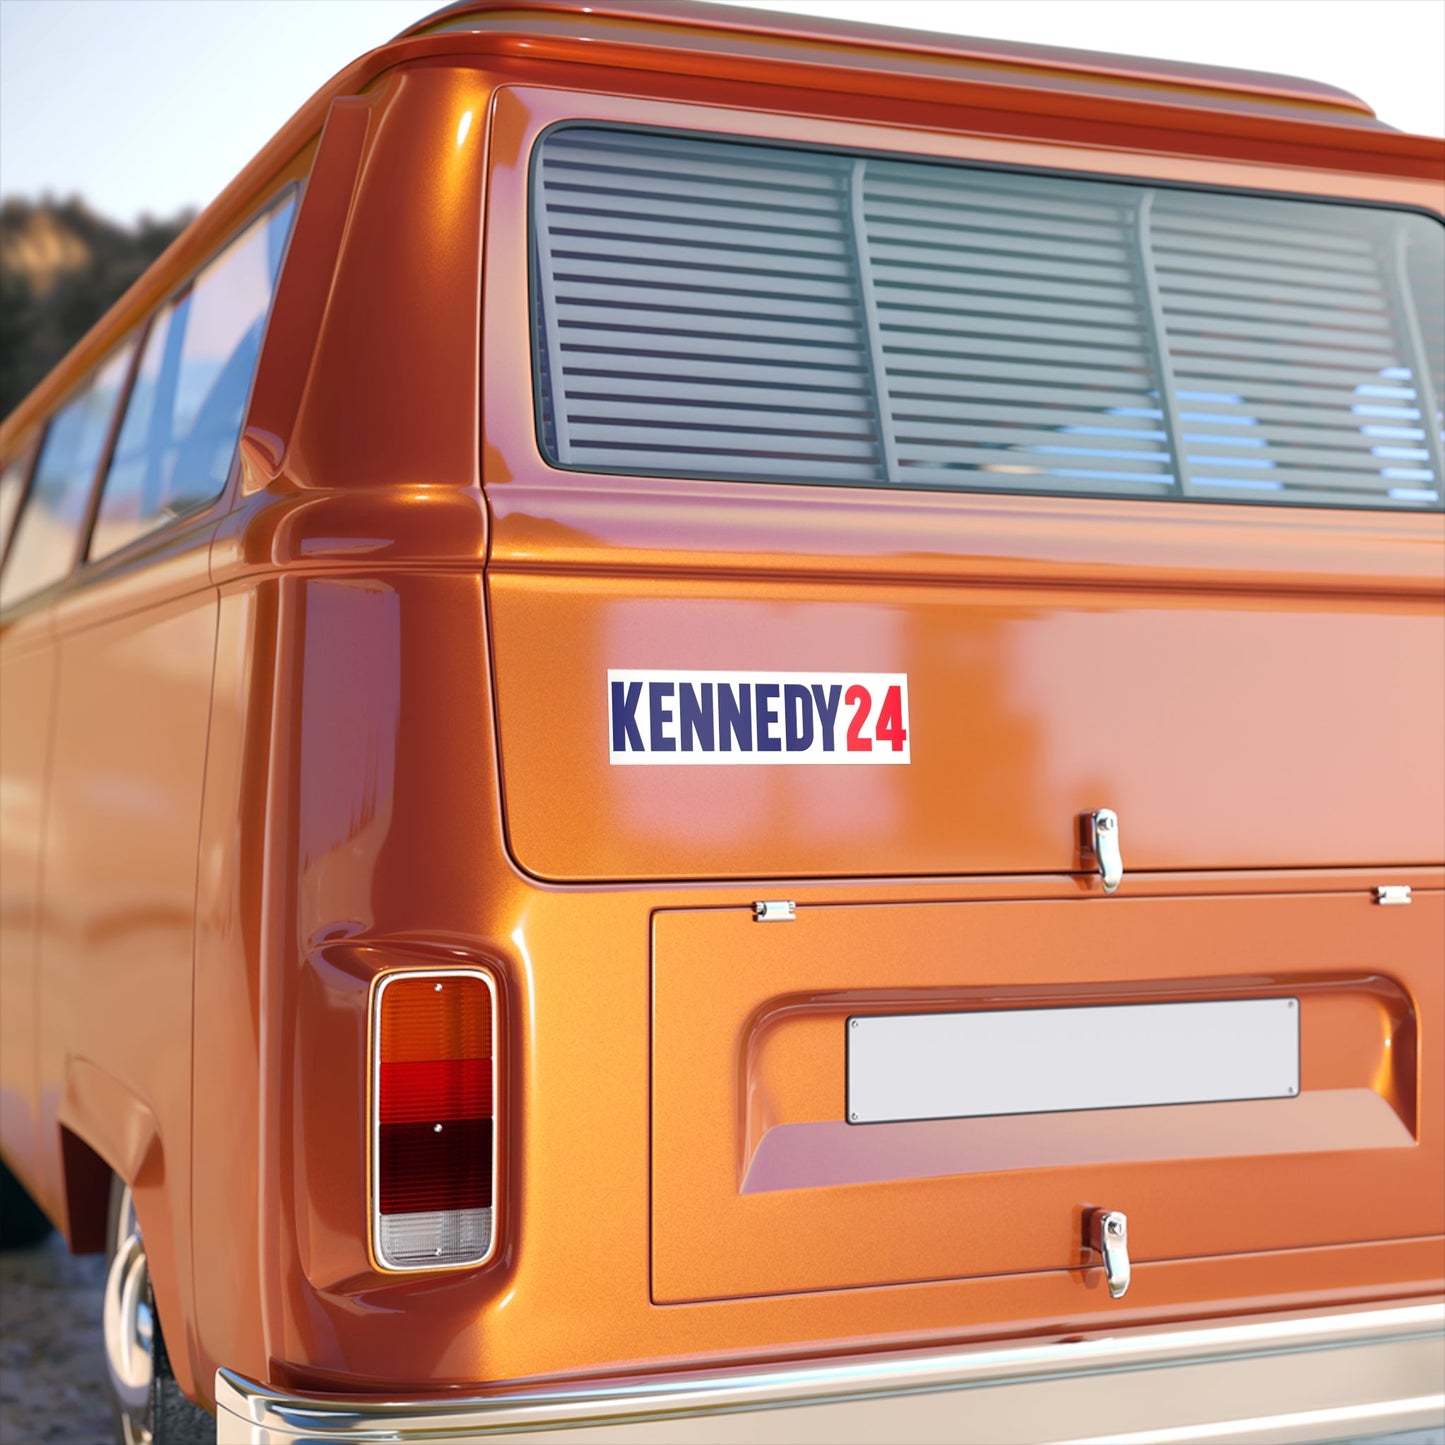 Kennedy24 Bumper Sticker - TEAM KENNEDY. All rights reserved